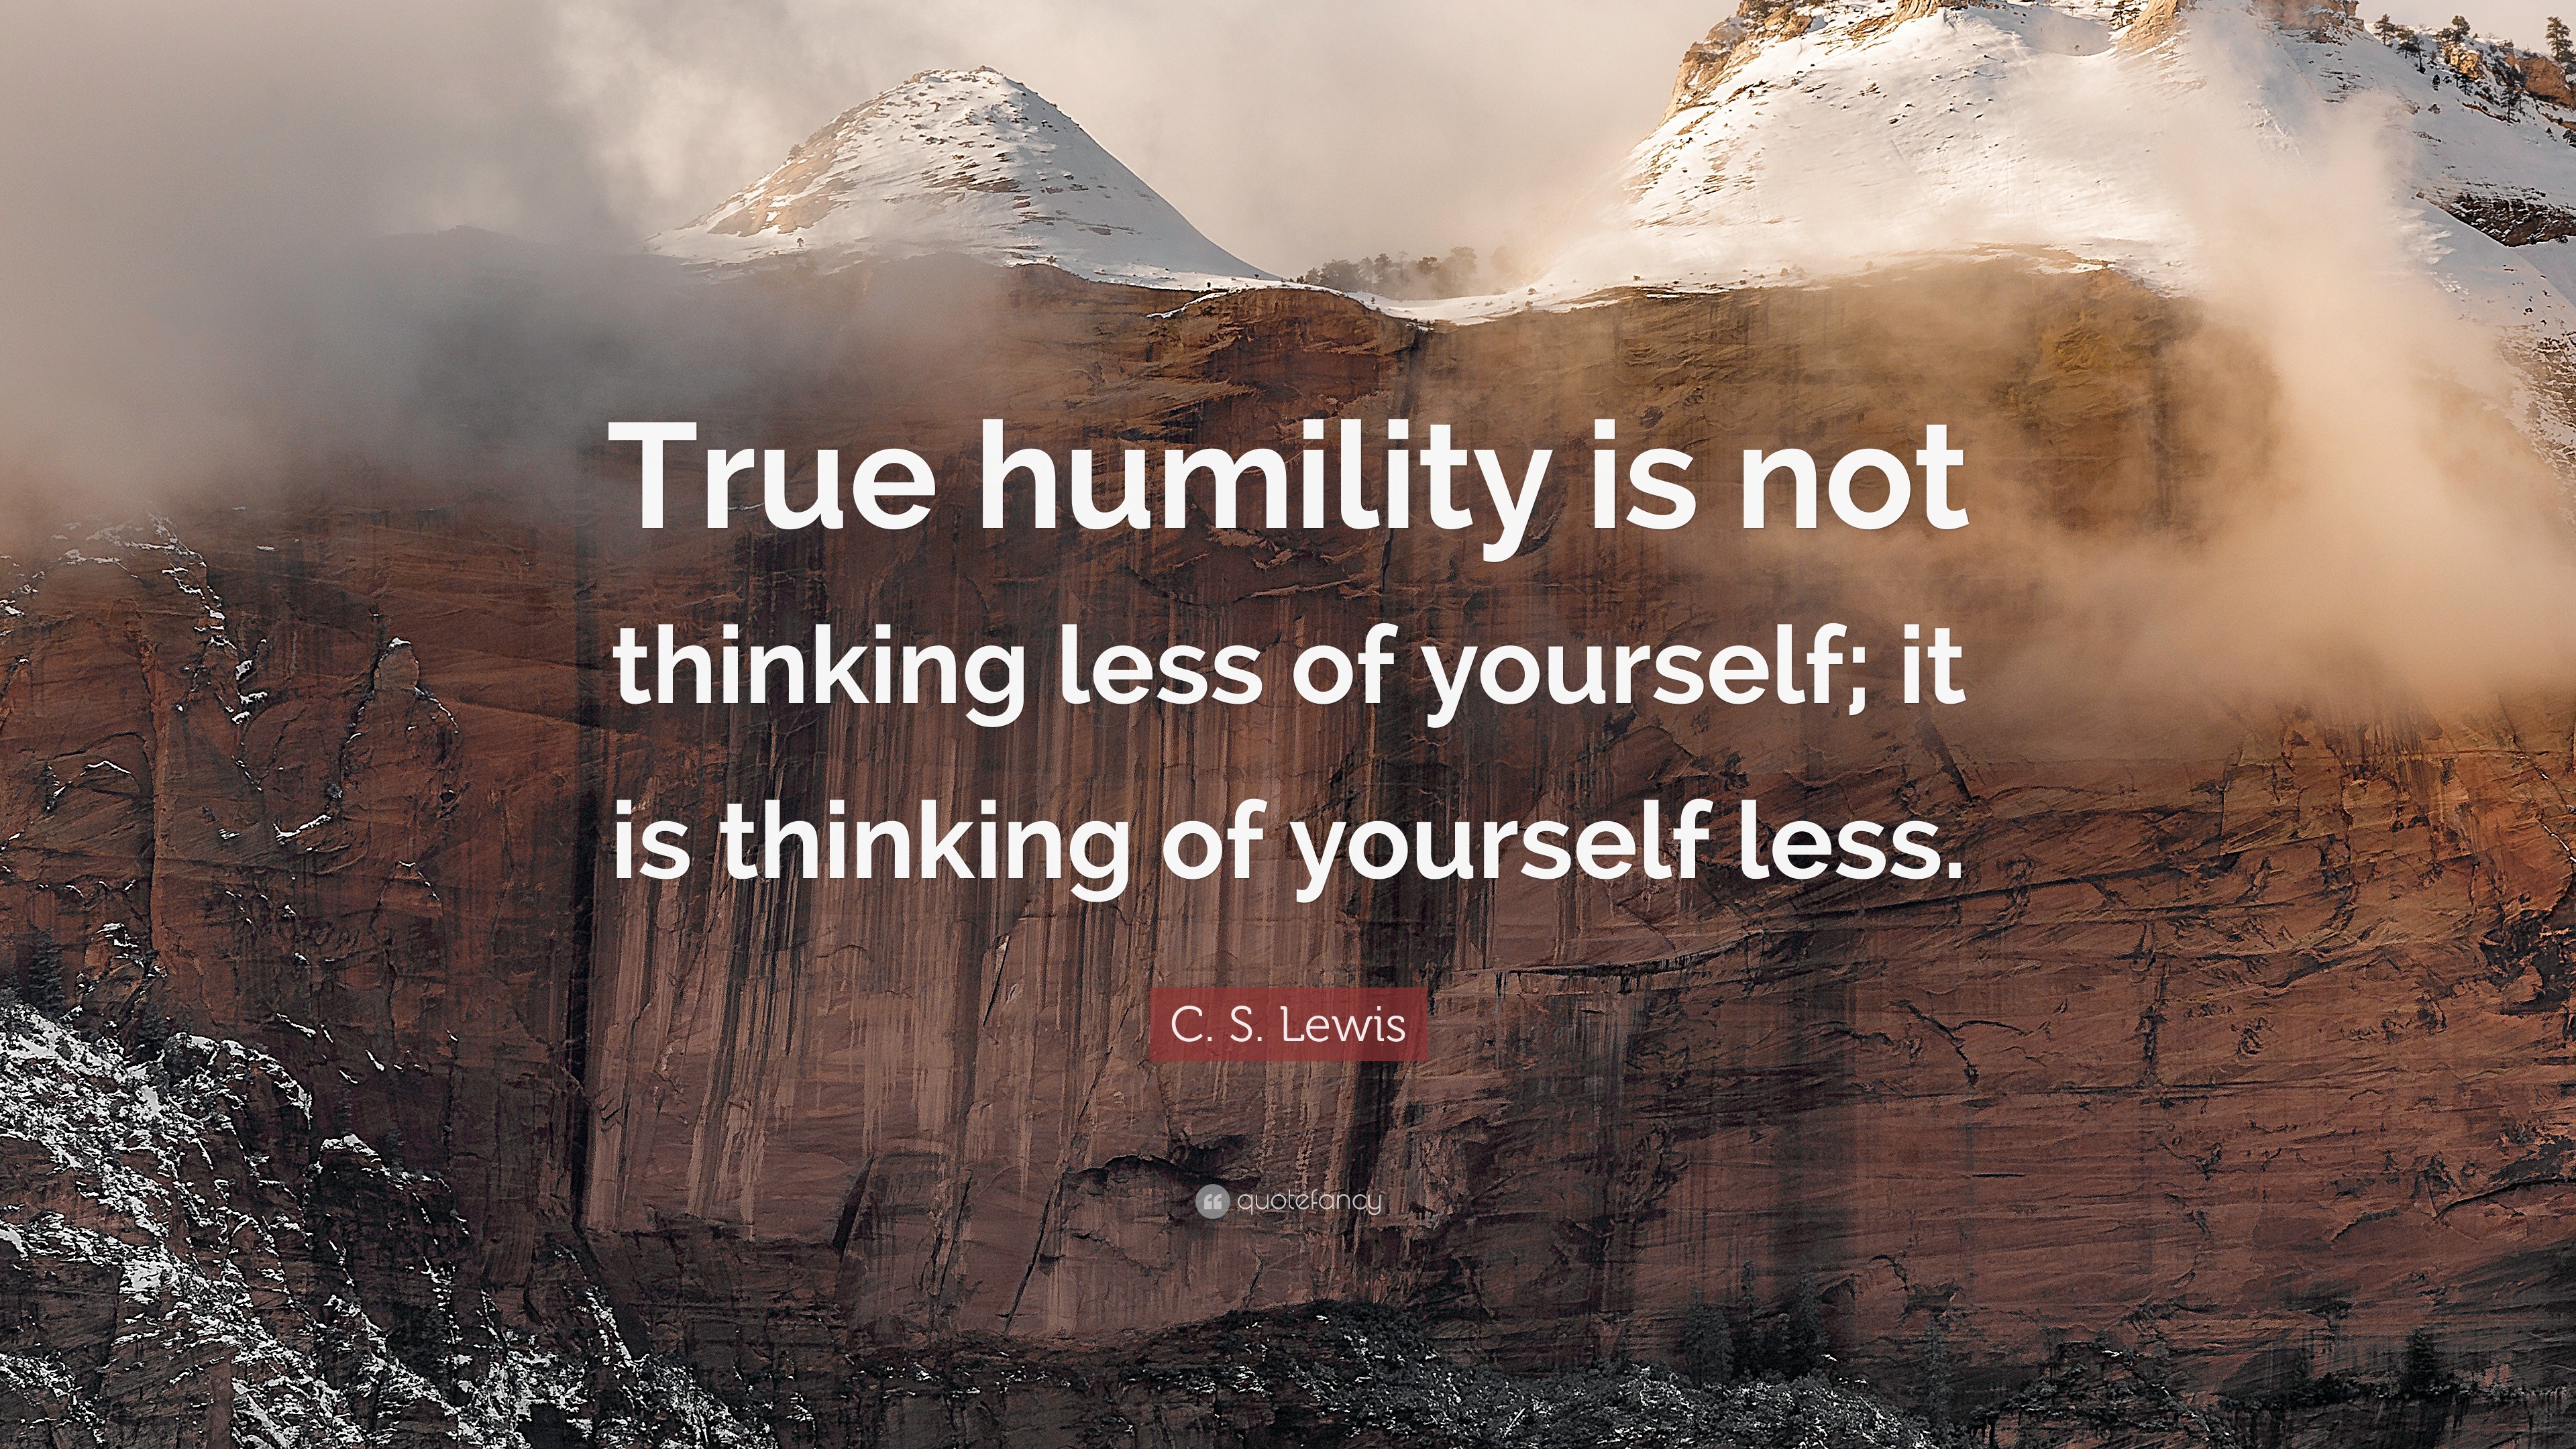 C. S. Lewis Quote: “True humility is not thinking less of yourself; it